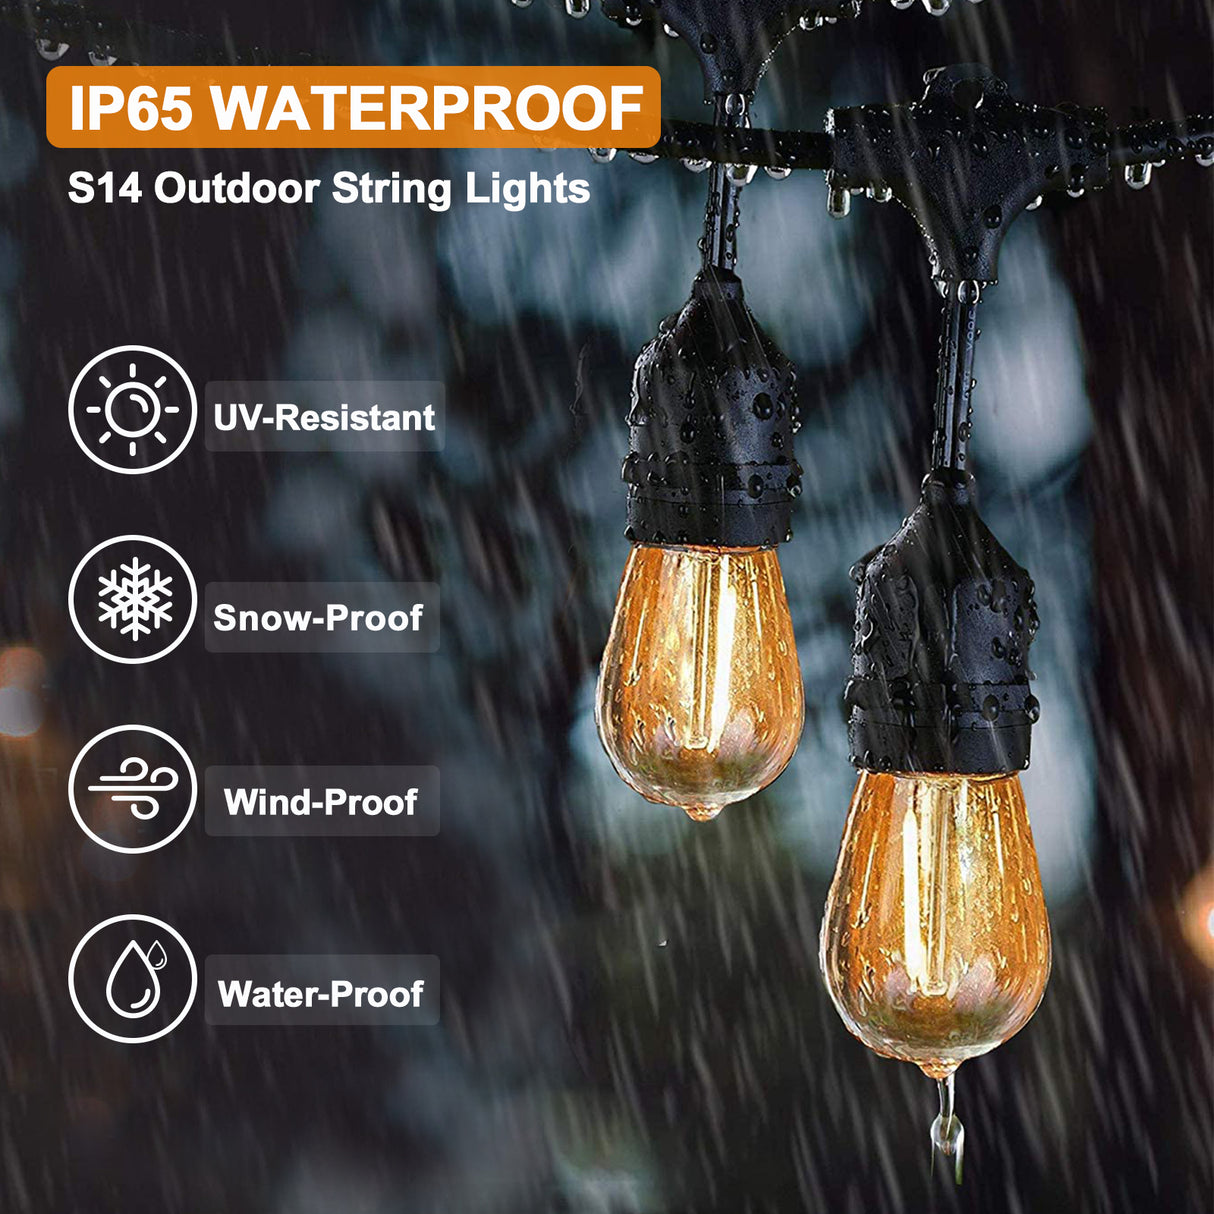 EAGLE PEAK 25 FT S14 Solar-Powered String Lights, IP65, 10 Shatterproof Edison Vintage Bulbs (2 Spare) for Outdoors, 10 Hanging Sockets, Decorative Lights for Christmas, Patio, Garden, Wedding, Party, and Pool